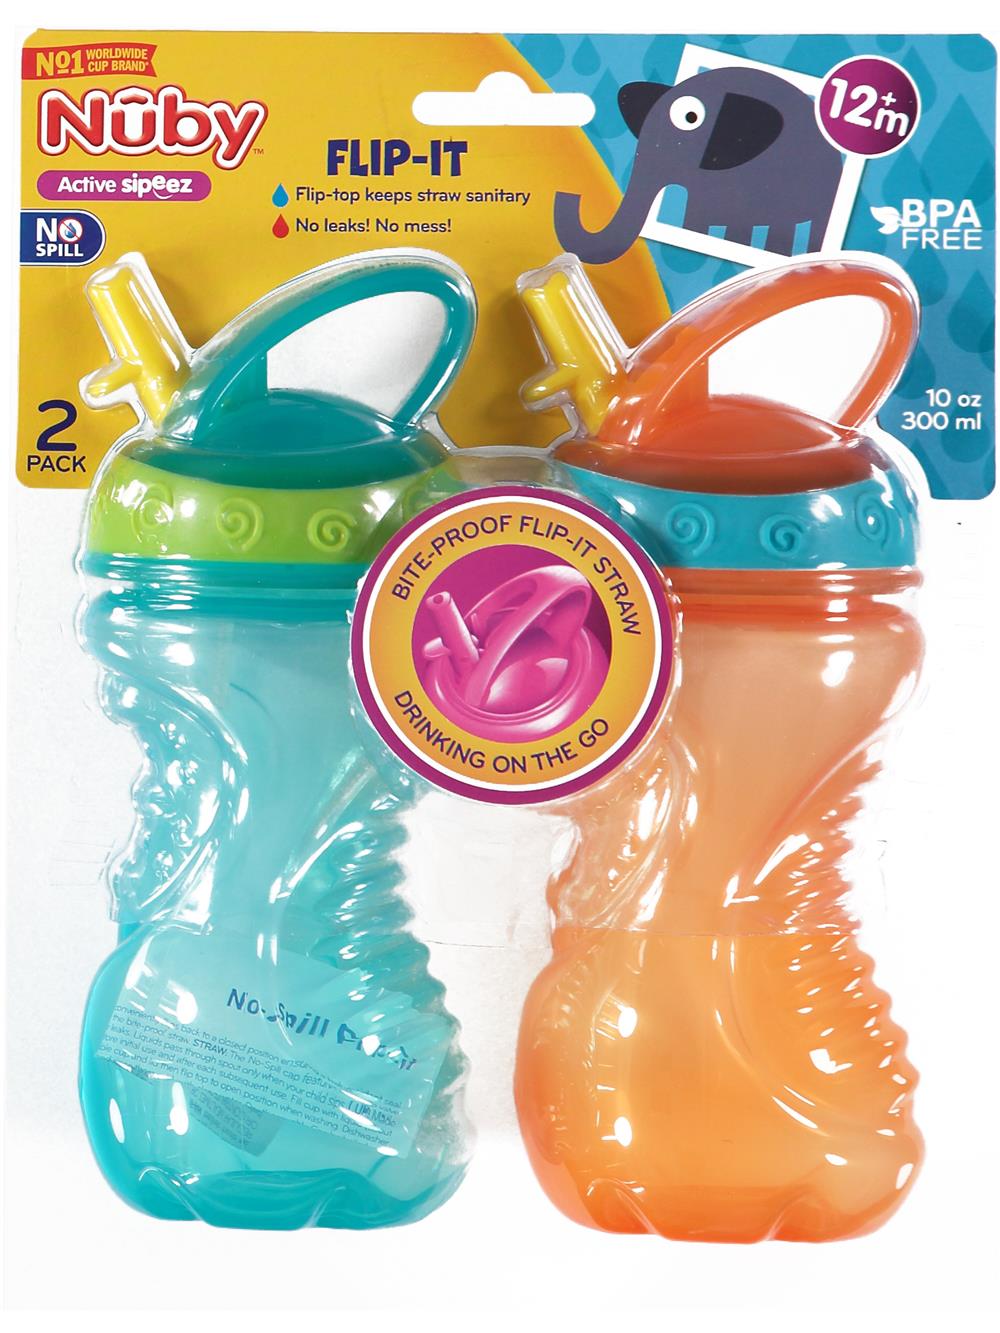 Best Nuby Sippy Cup Review - Straw Cup vs. Flip-it Cup - HubPages